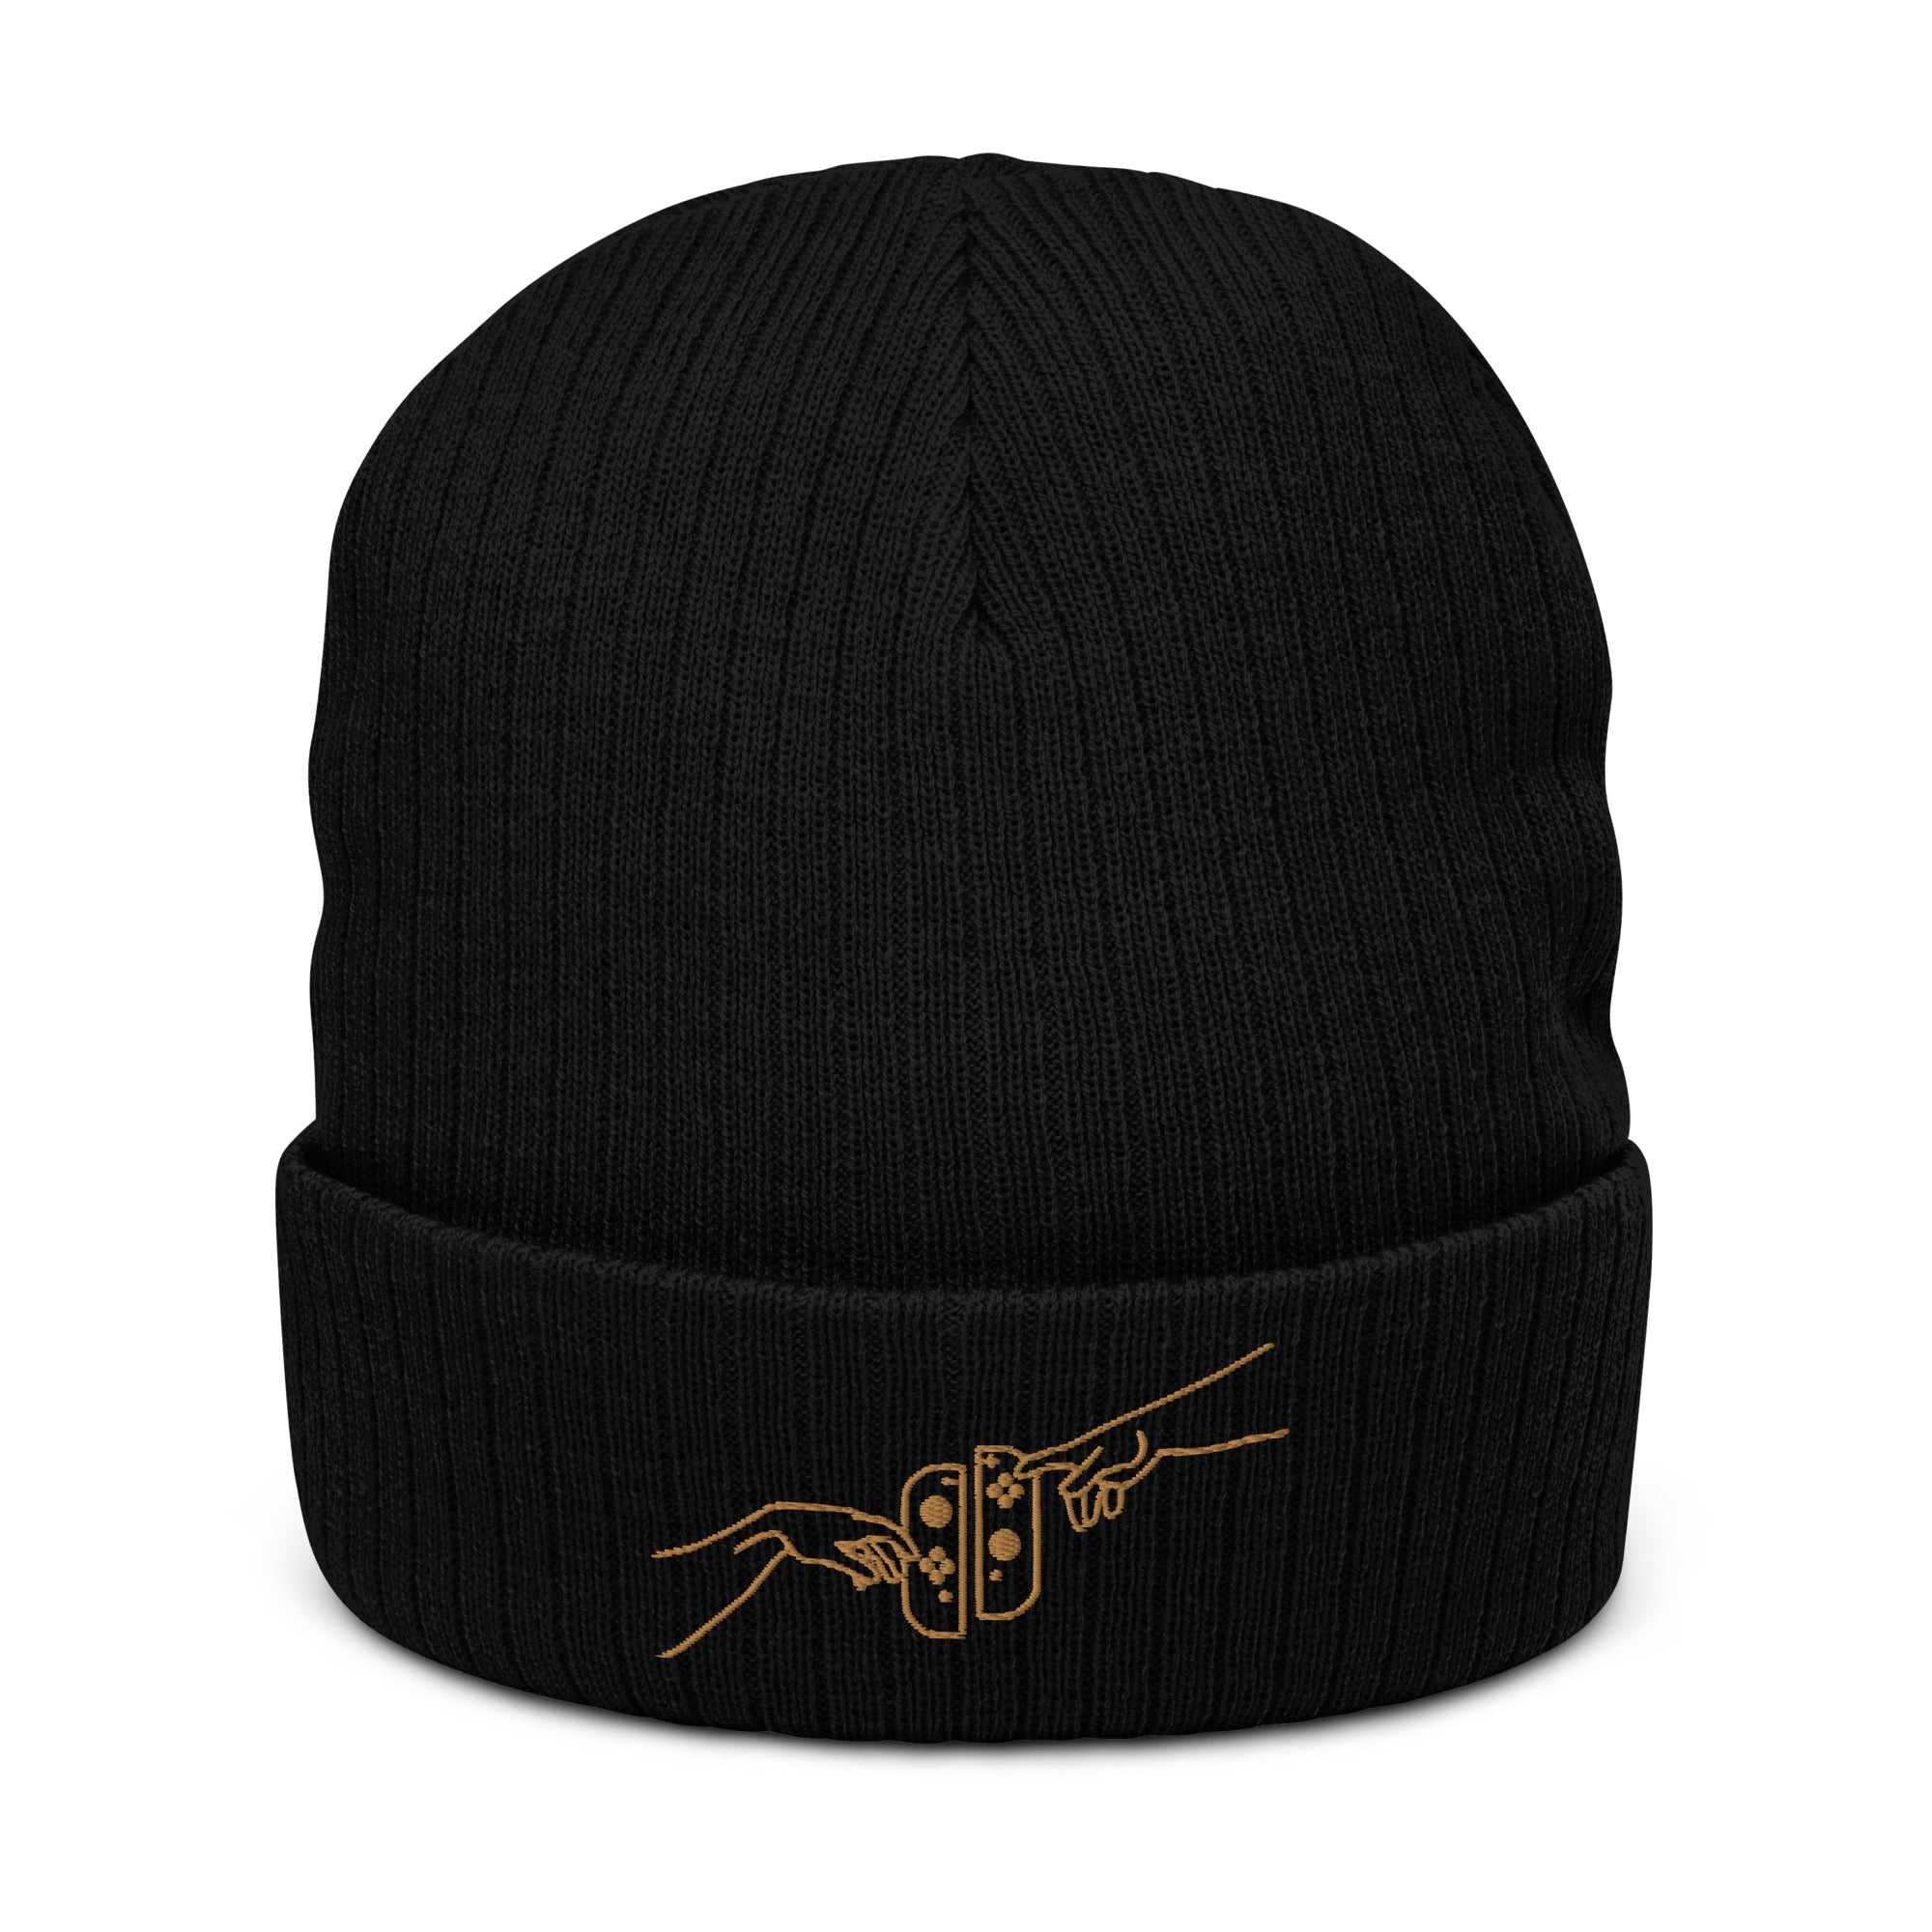 The Creation of Switch | Ribbed knit beanie | Cozy Gamer Threads and Thistles Inventory Black 